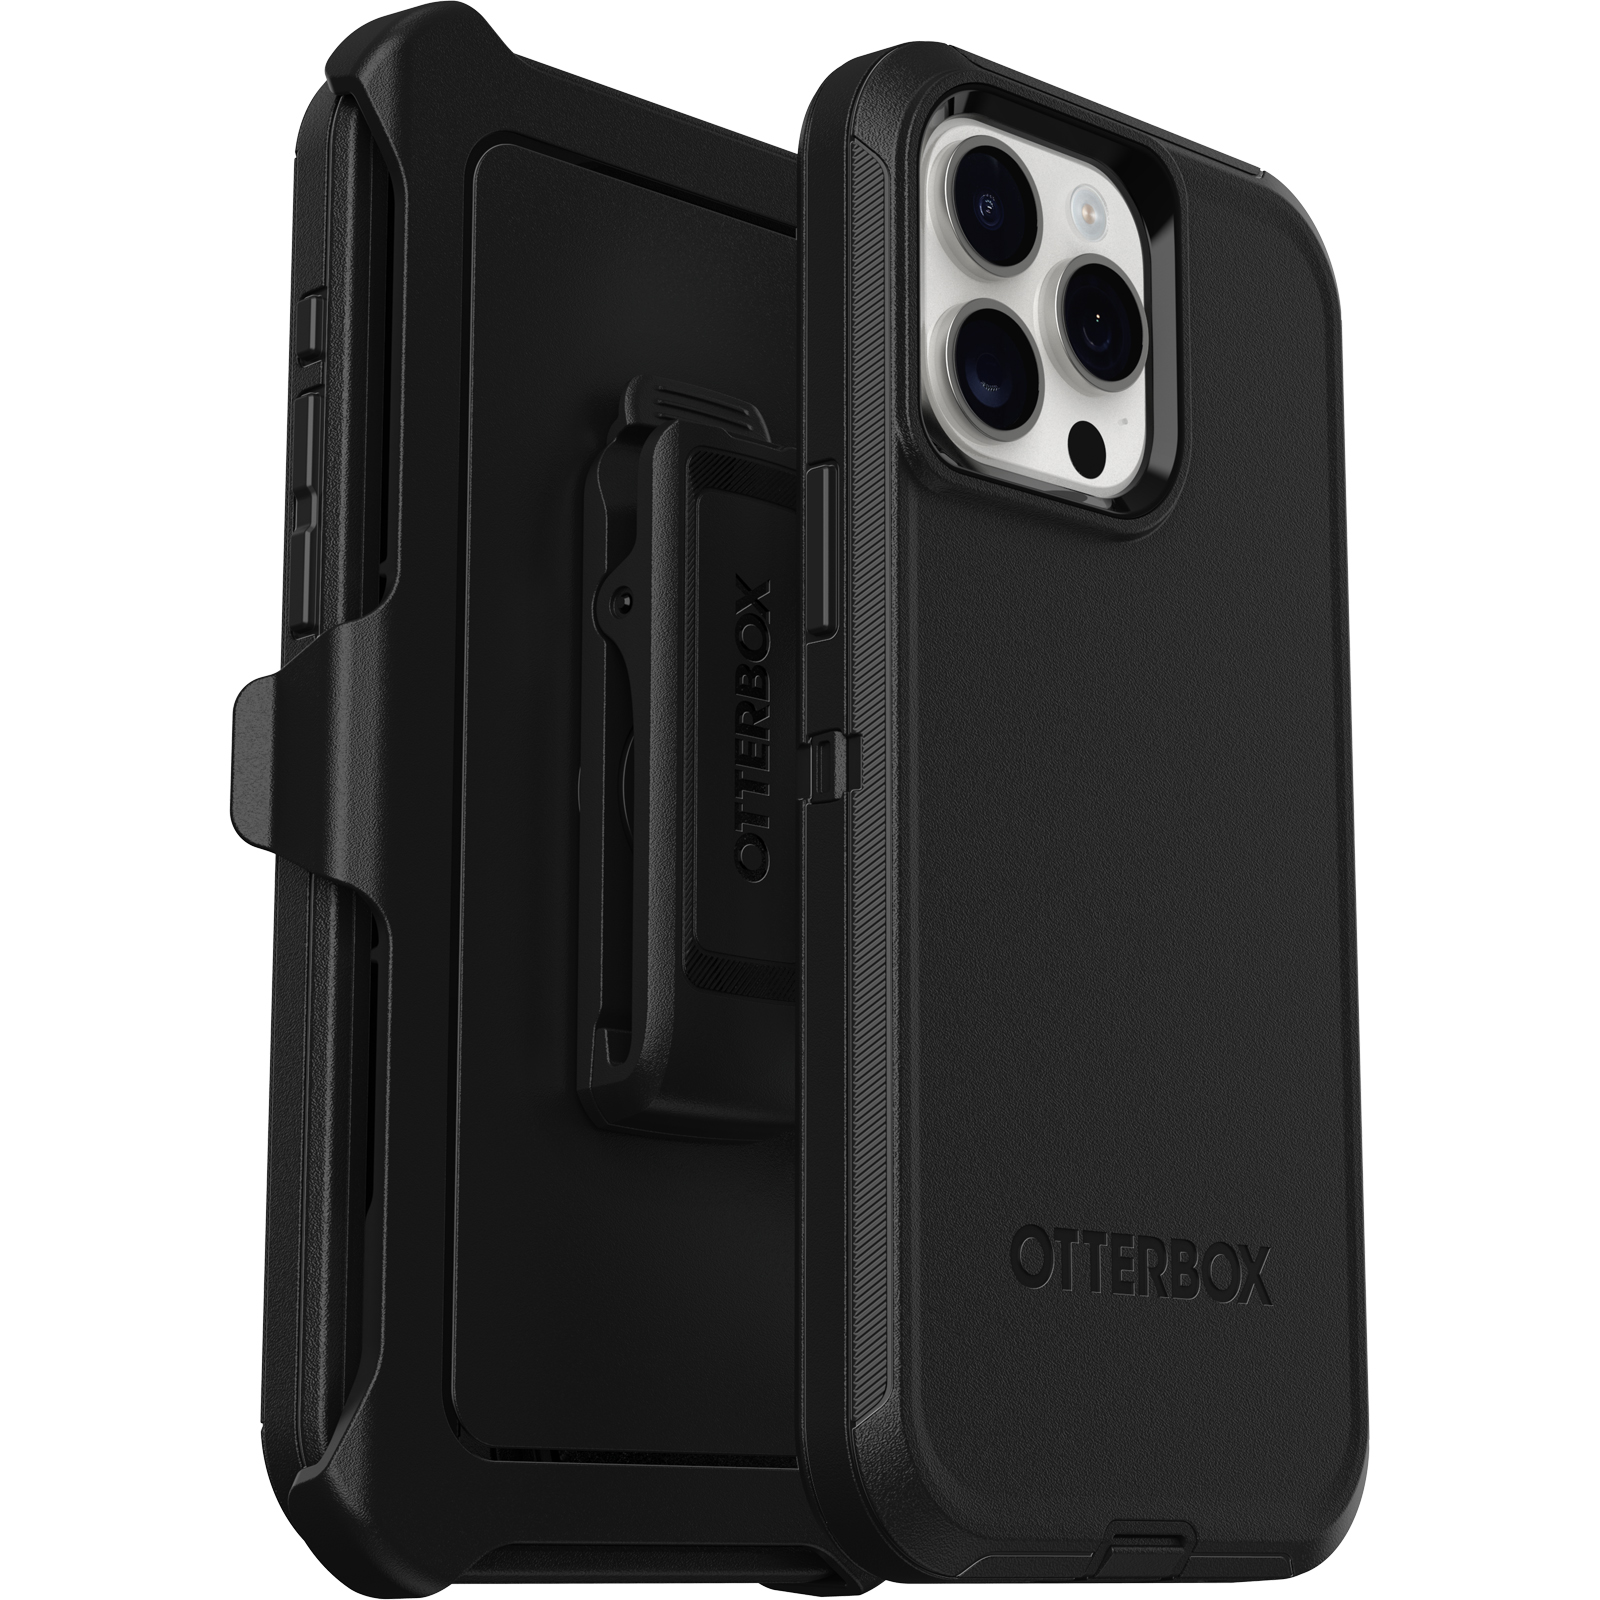 OtterBox iPhone 14 Pro Max (ONLY) Defender Series XT Case - OPEN OCEAN  (Blue), screenless, rugged , snaps to MagSafe, lanyard attachment